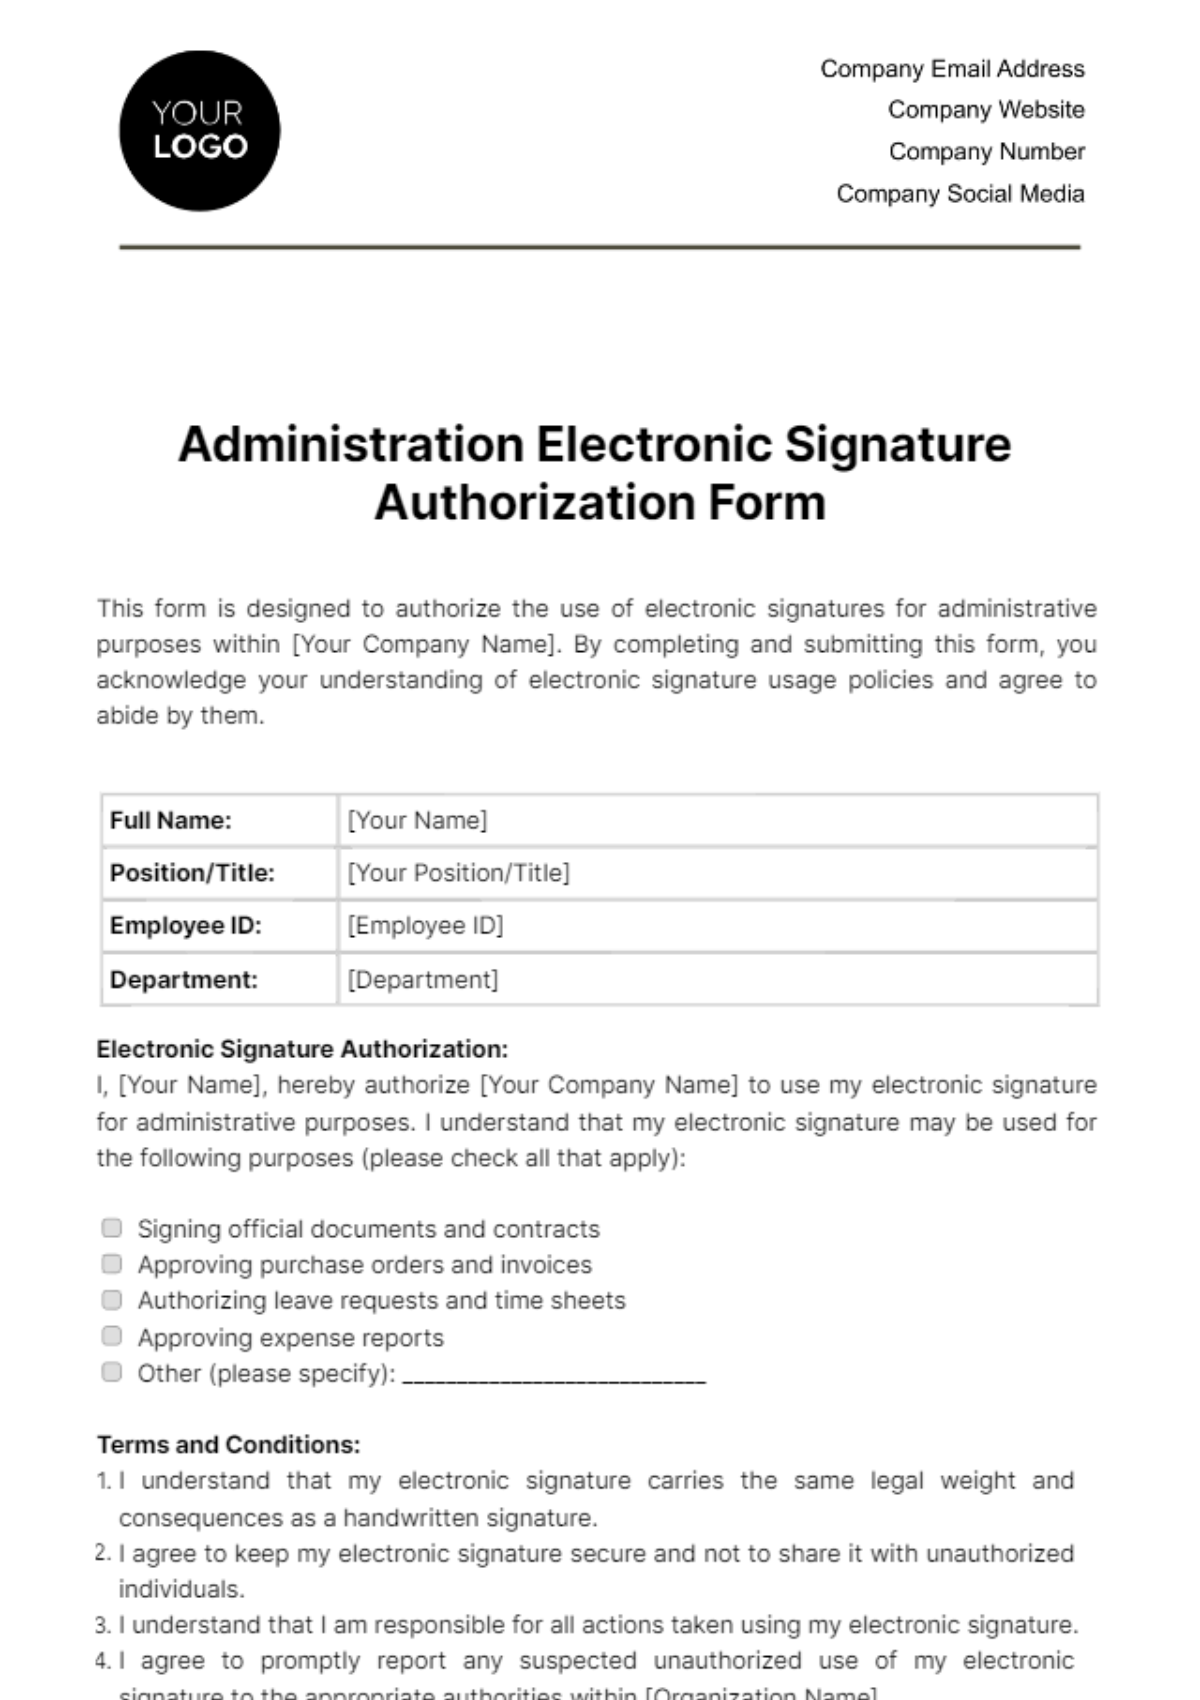 Administration Electronic Signature Authorization Form Template